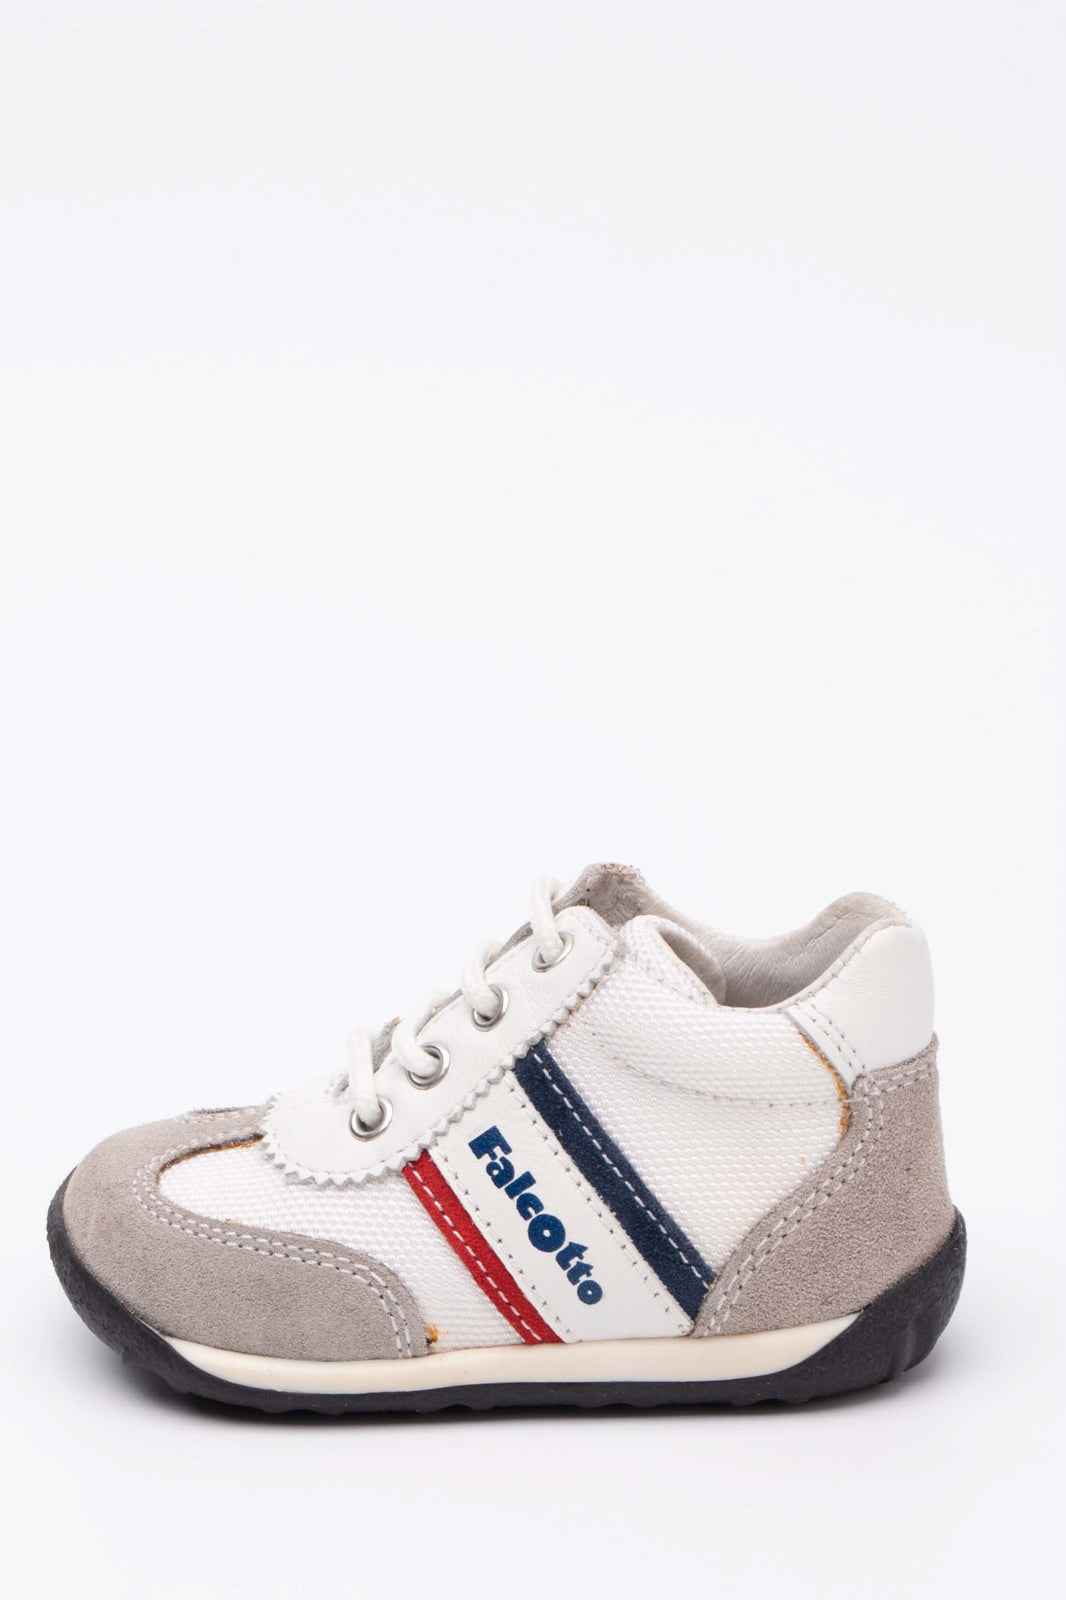 FALCOTTO BY NATURINO Baby Canvas & Leather Sneakers US5.5 EU21 UK4.5 Lace Up gallery main photo